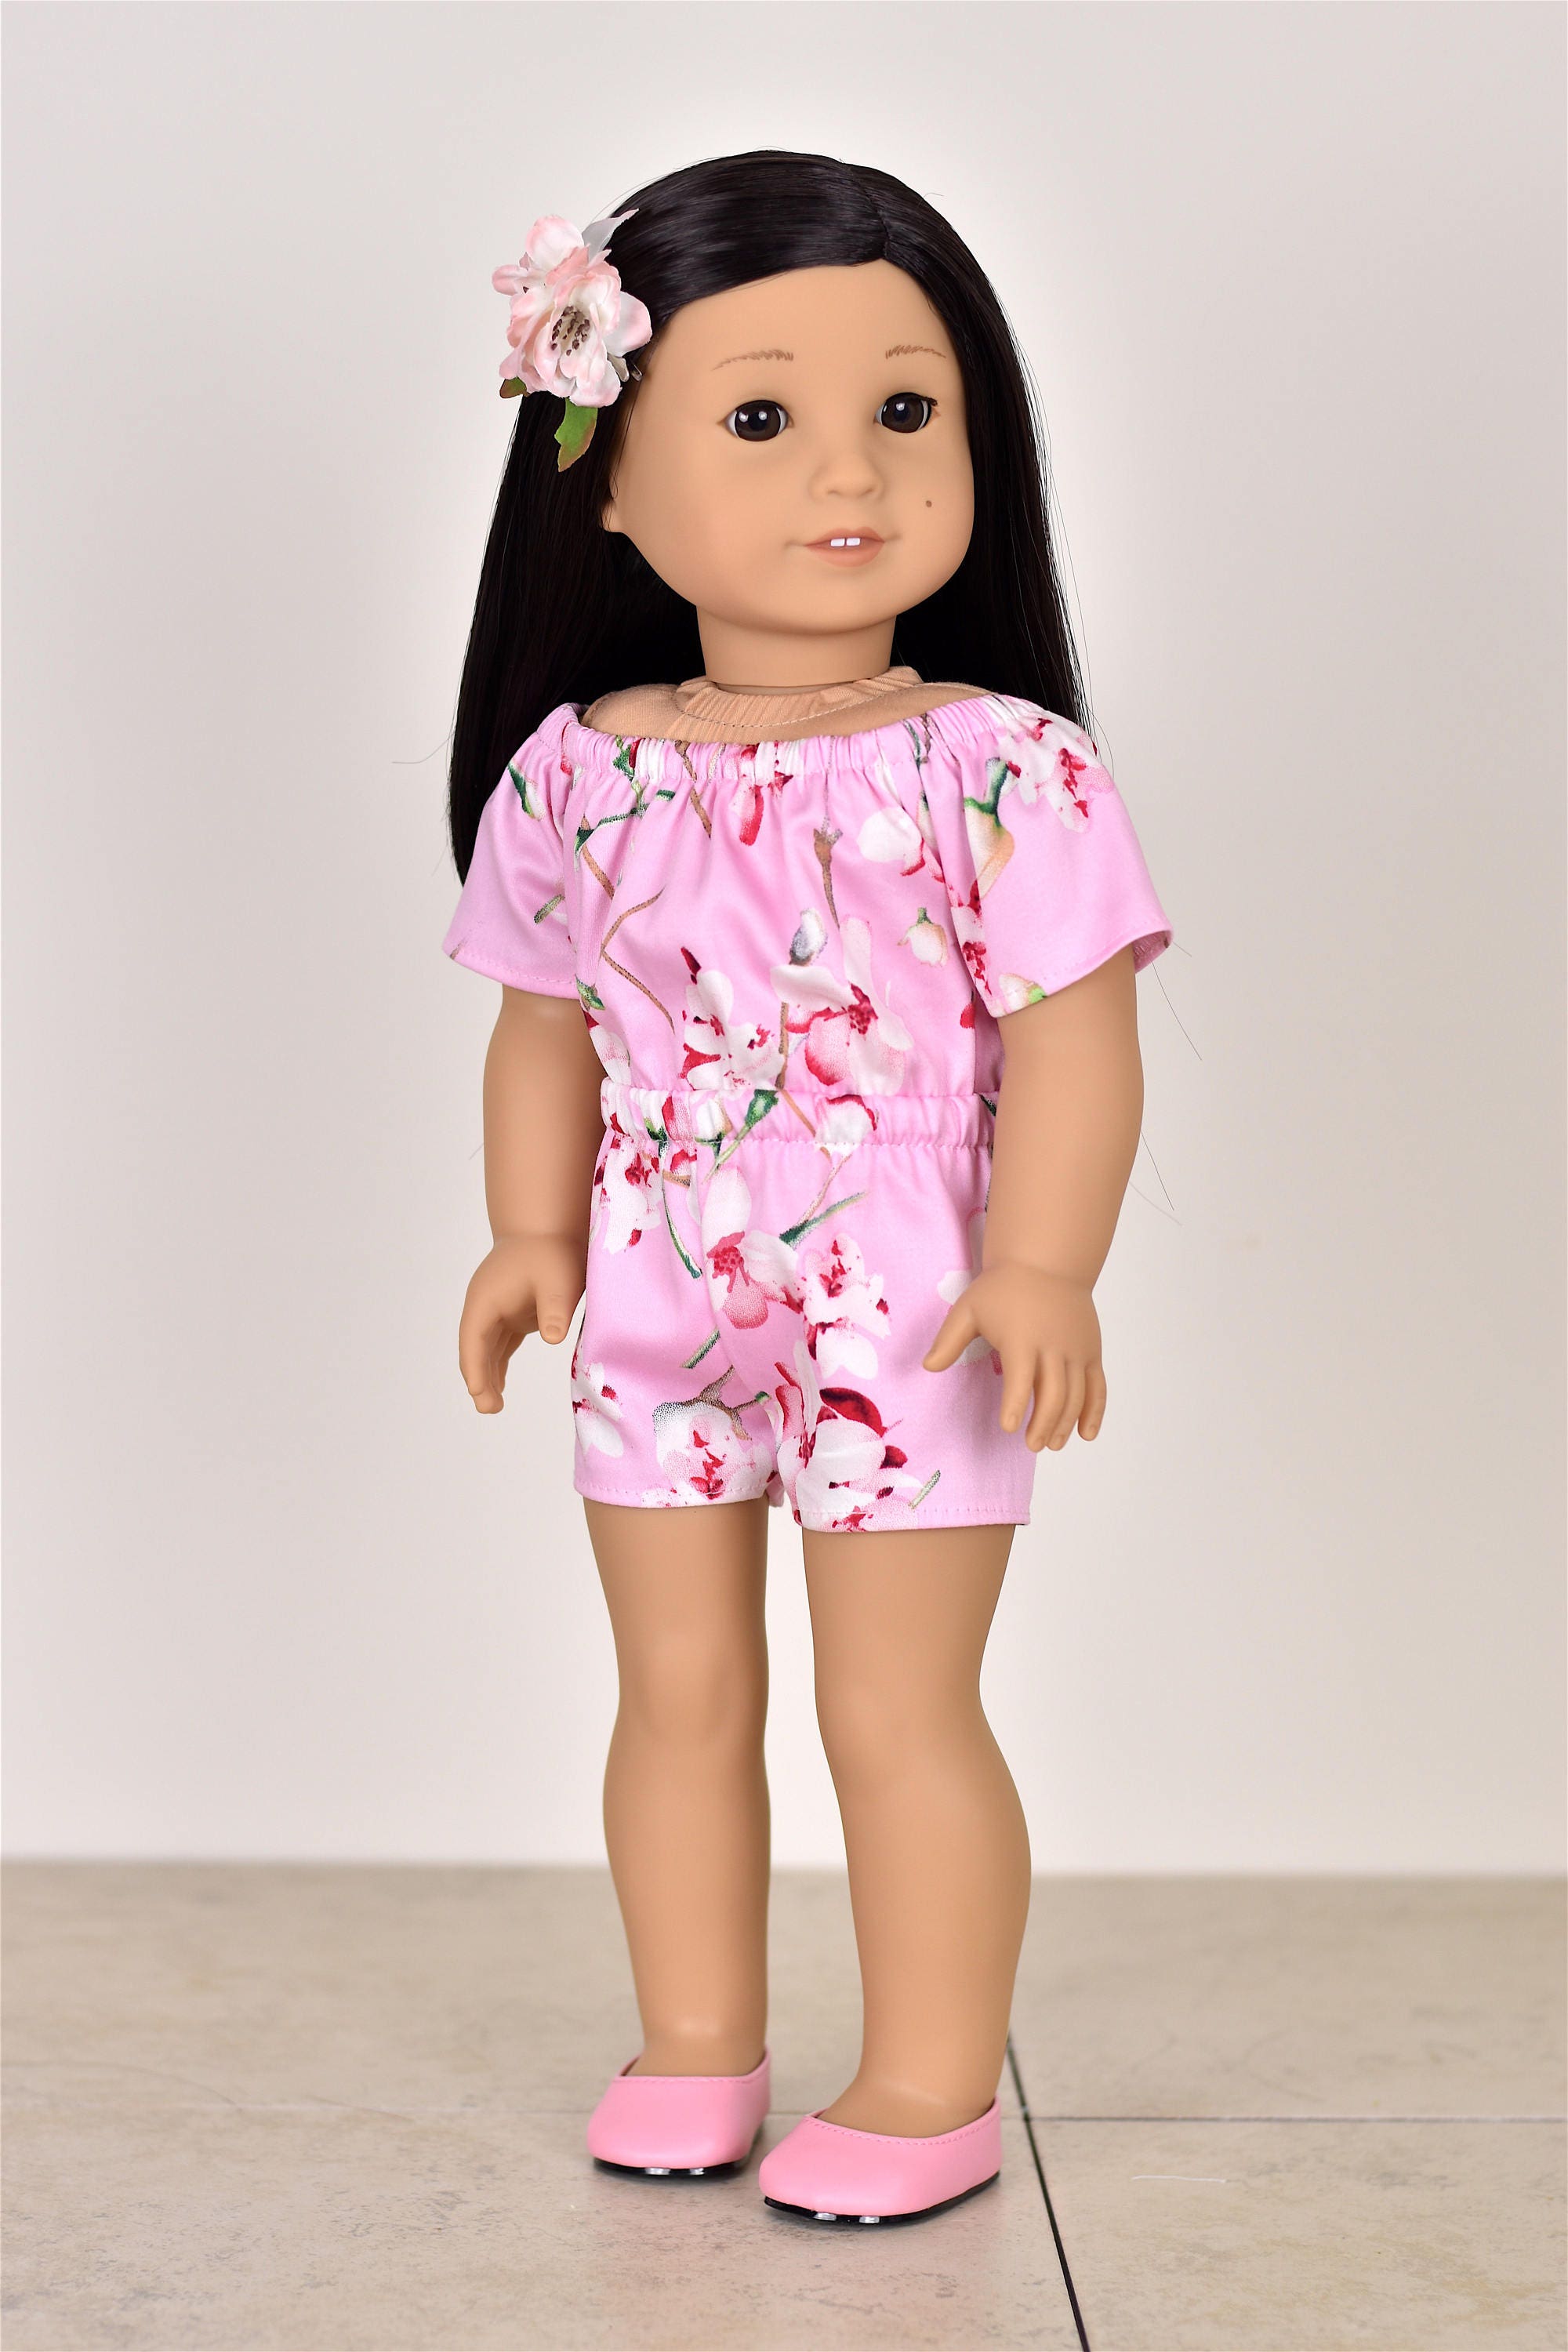 How To Make 18 Inch Doll Clothes